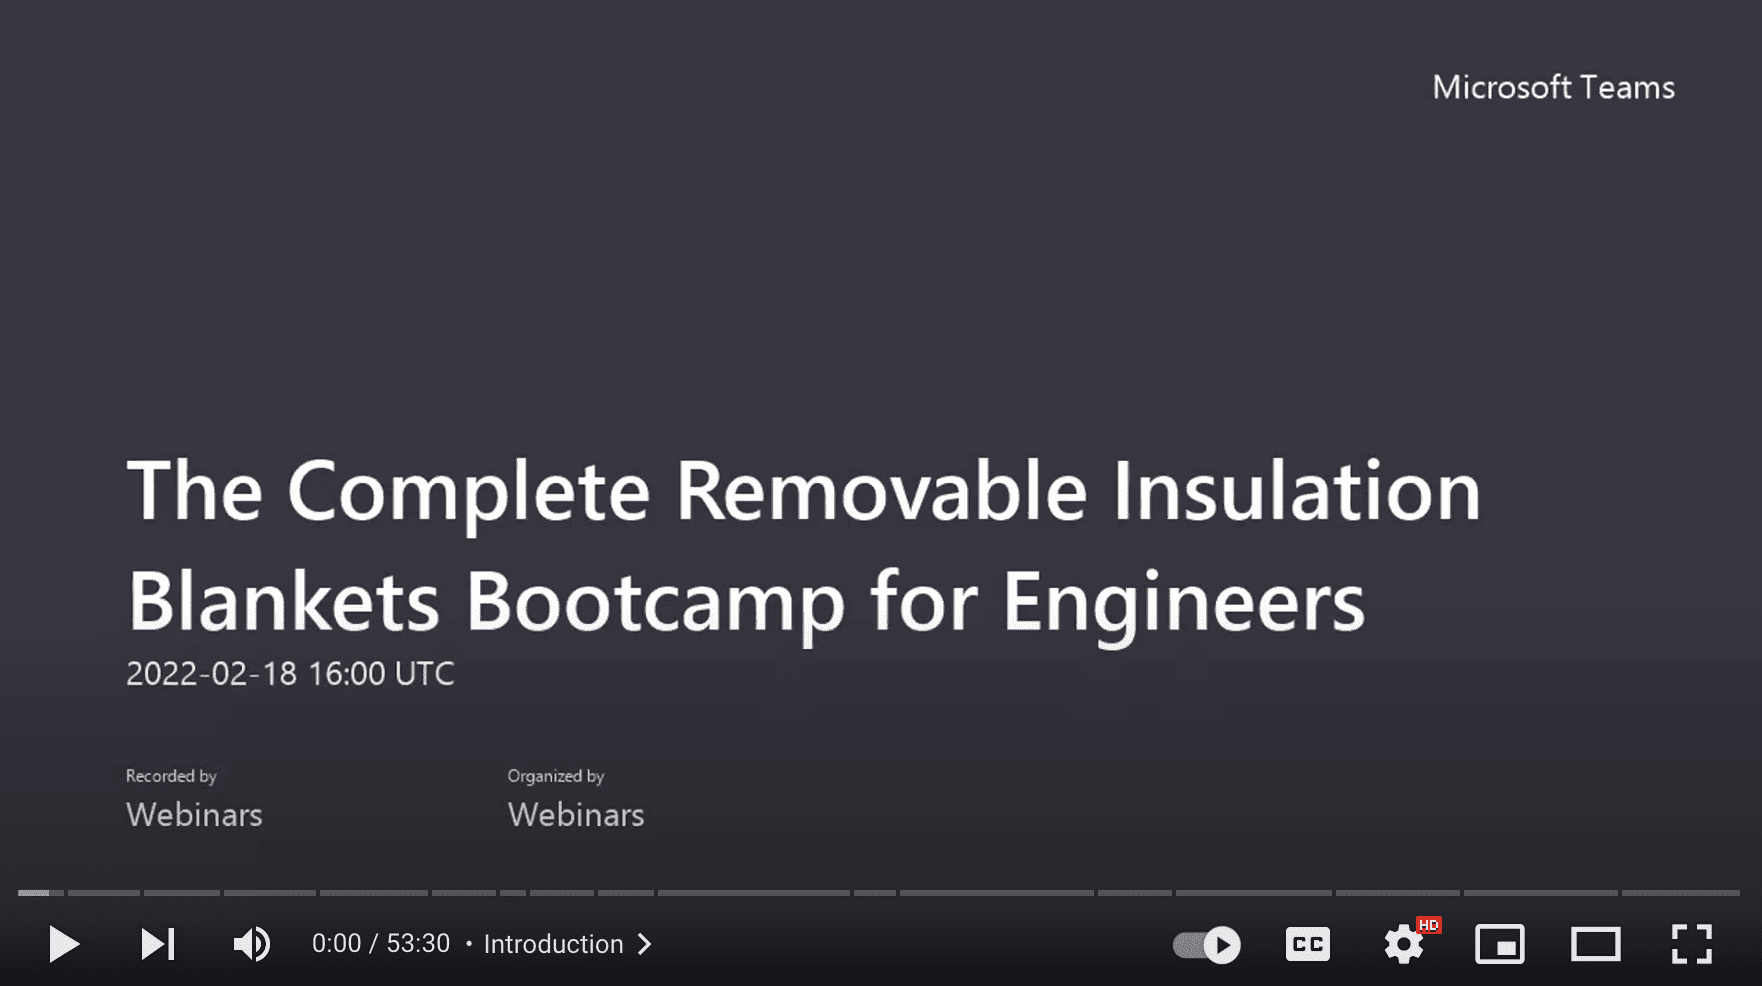 The Complete Removable Insulation Blankets Bootcamp for Engineers